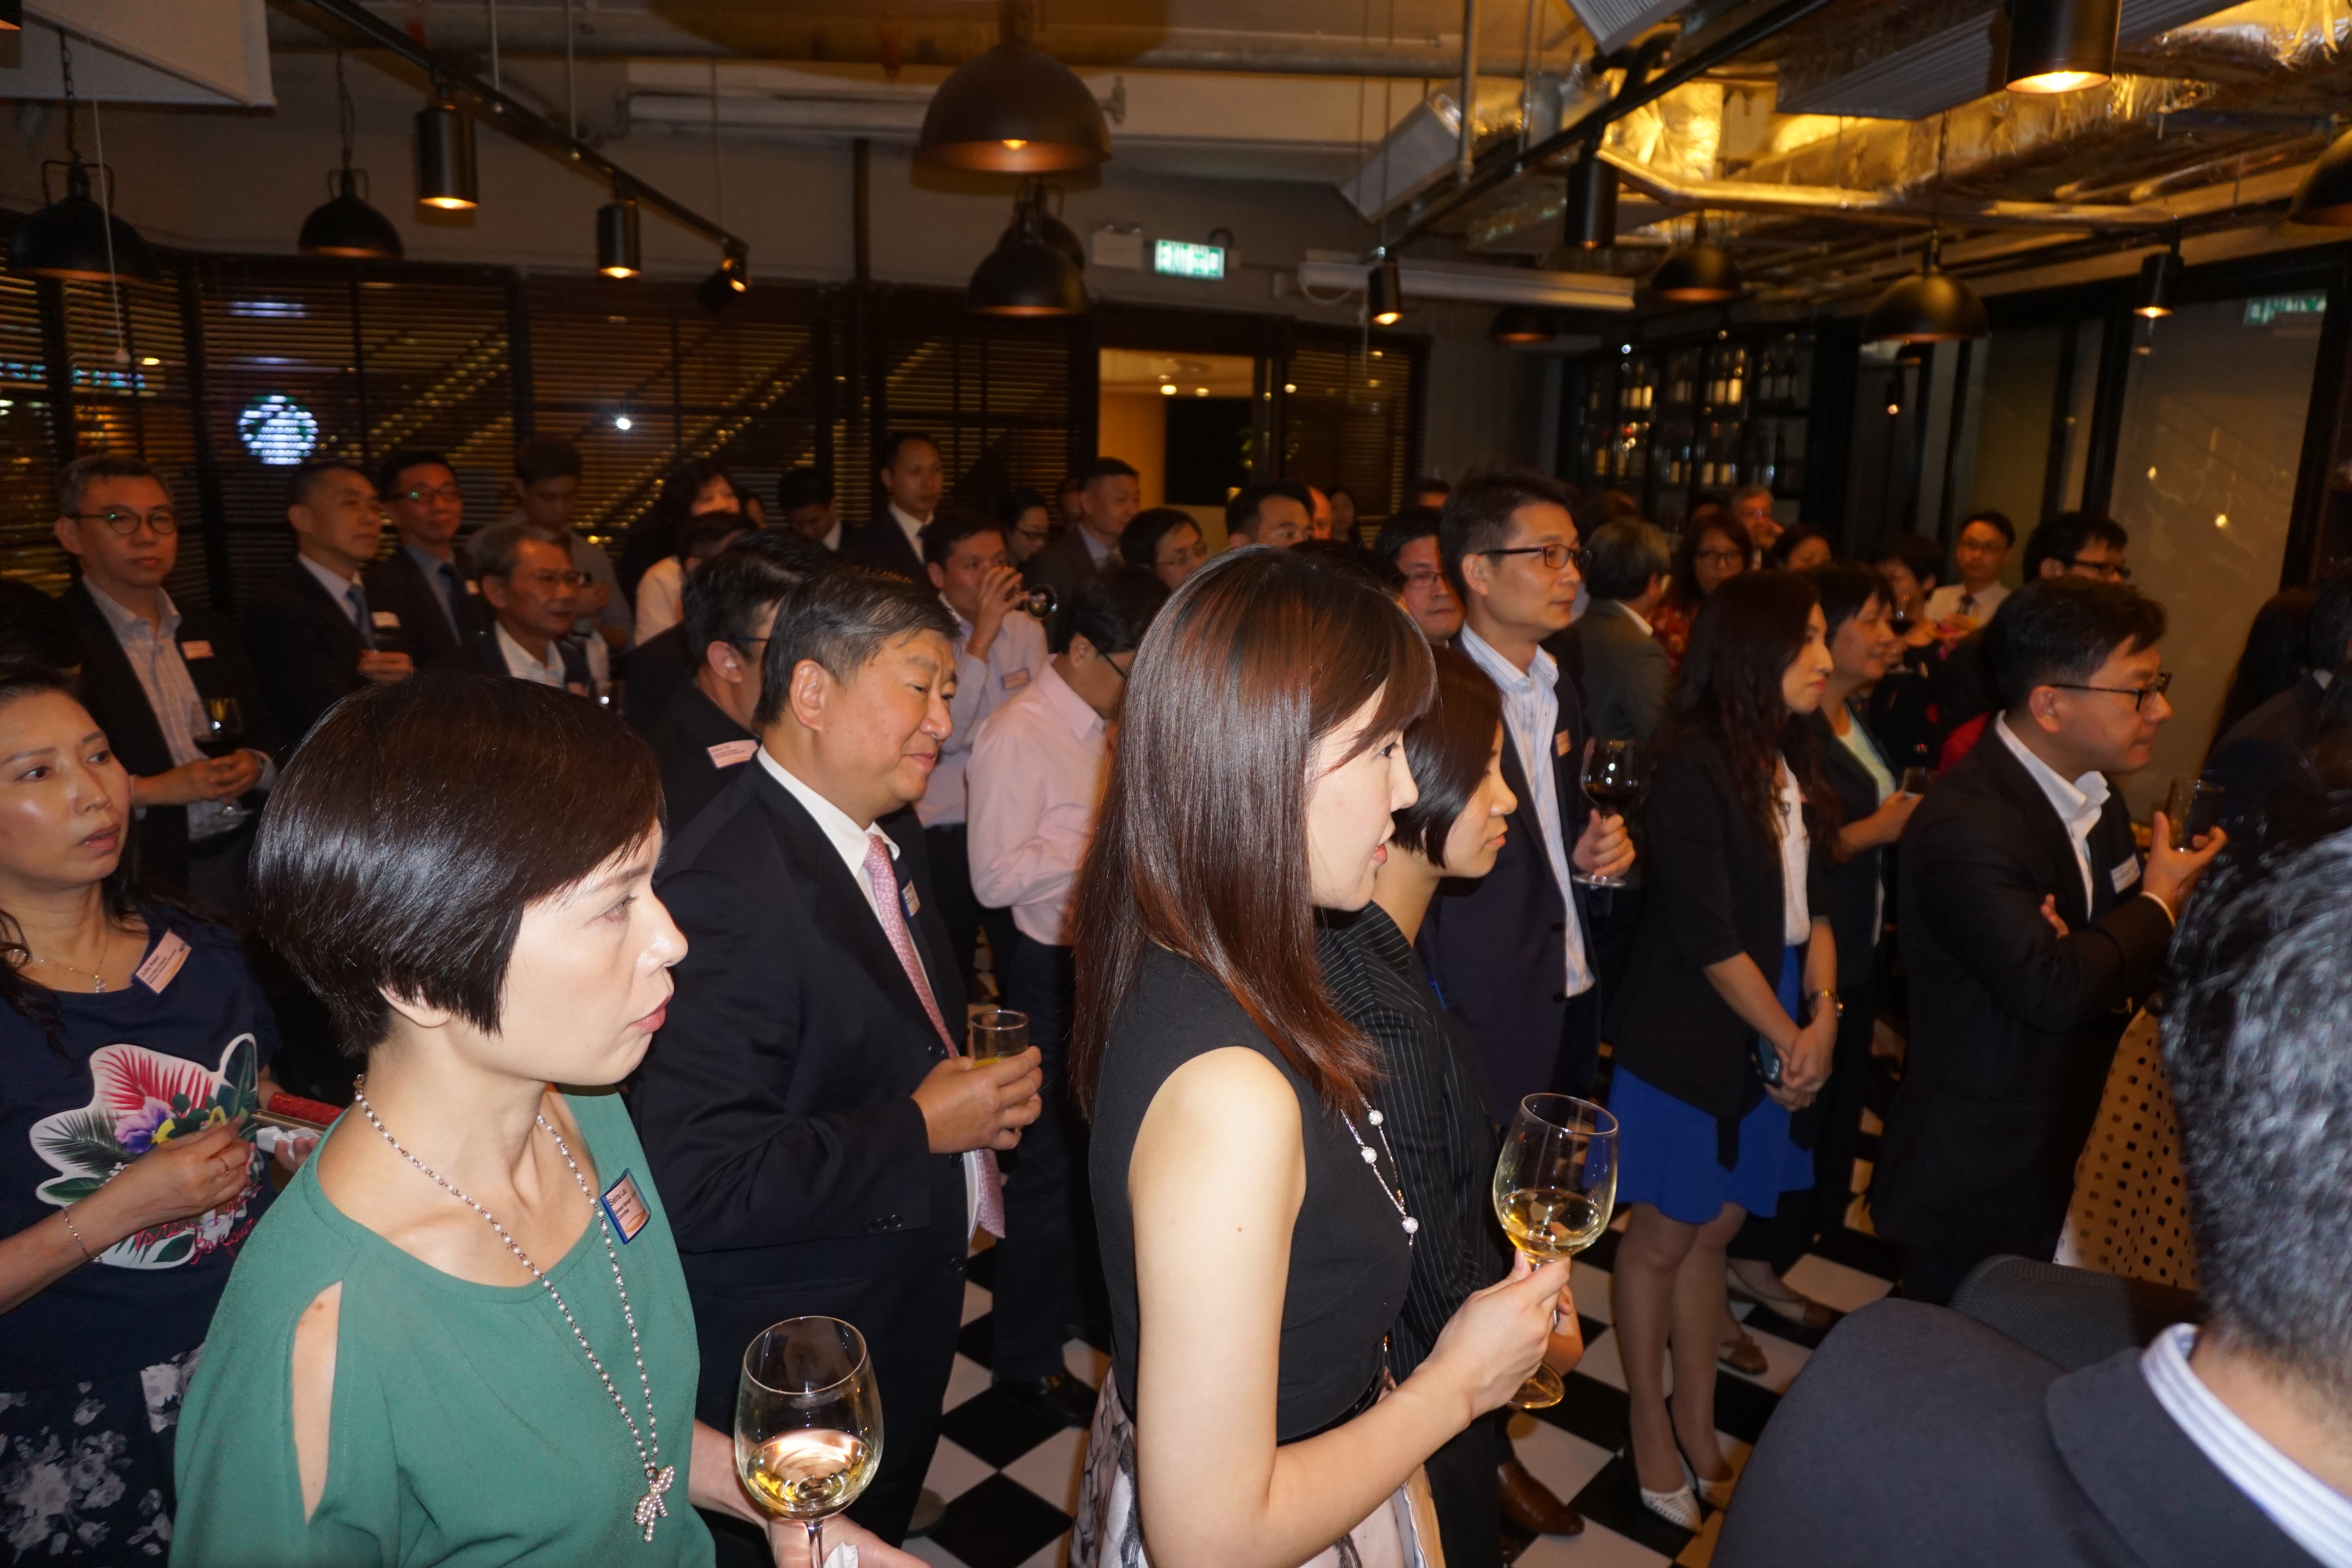 Technical Associations’ drink party with the relevant government officials and trade bodies